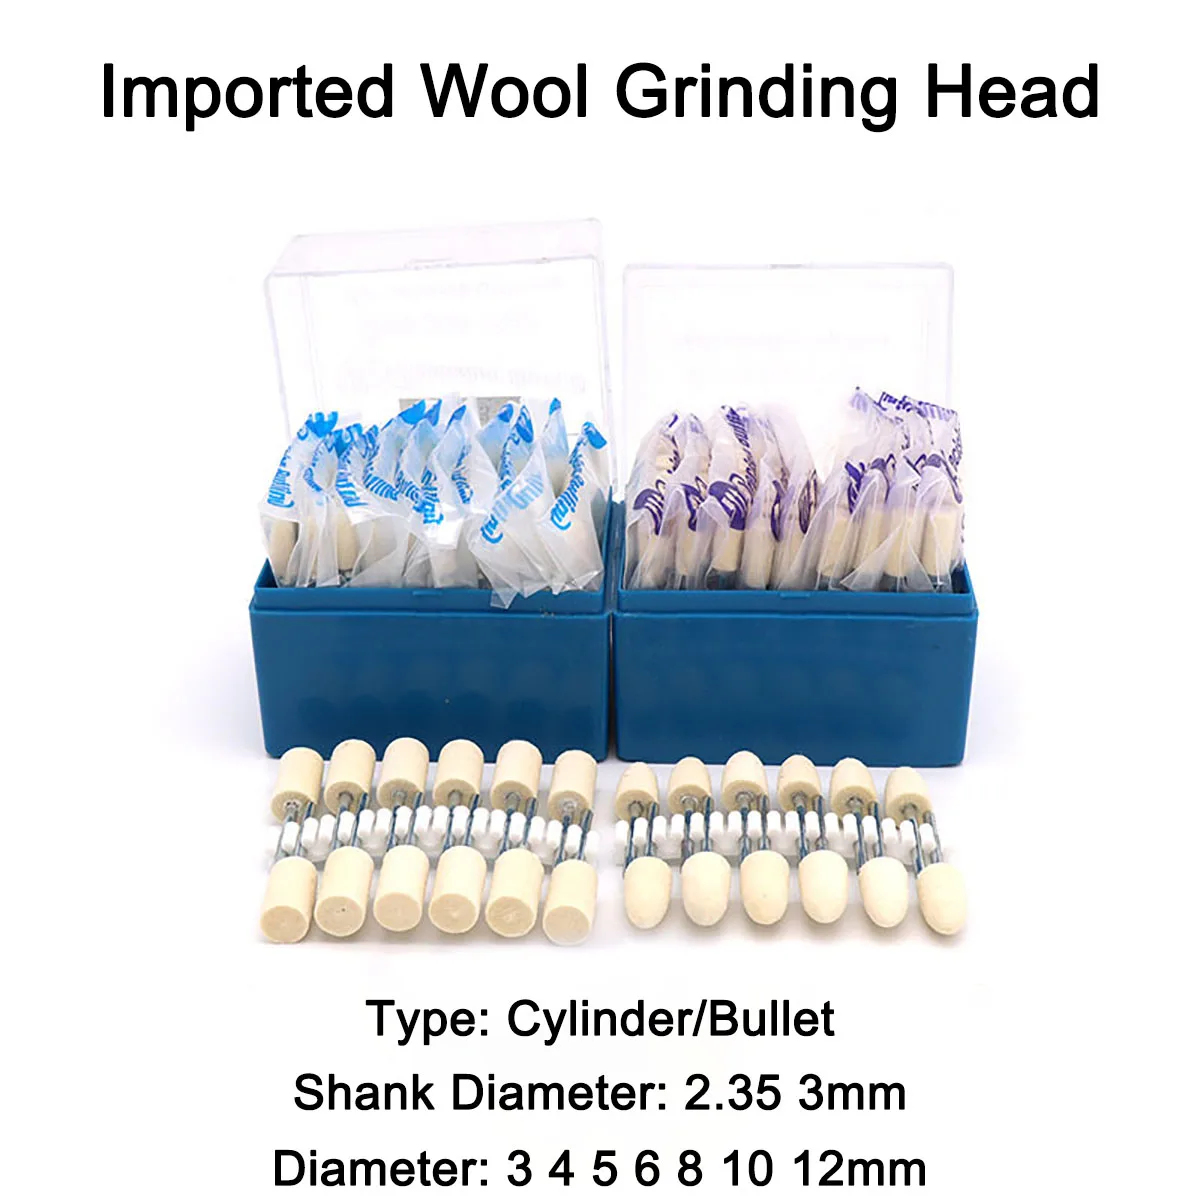 

5Pcs Shank Diameter 2.35mm Cylinder Imported Wool Grinding Heads Diameter 3 - 12mm for Pneumatic and Electric Rotary Grinders